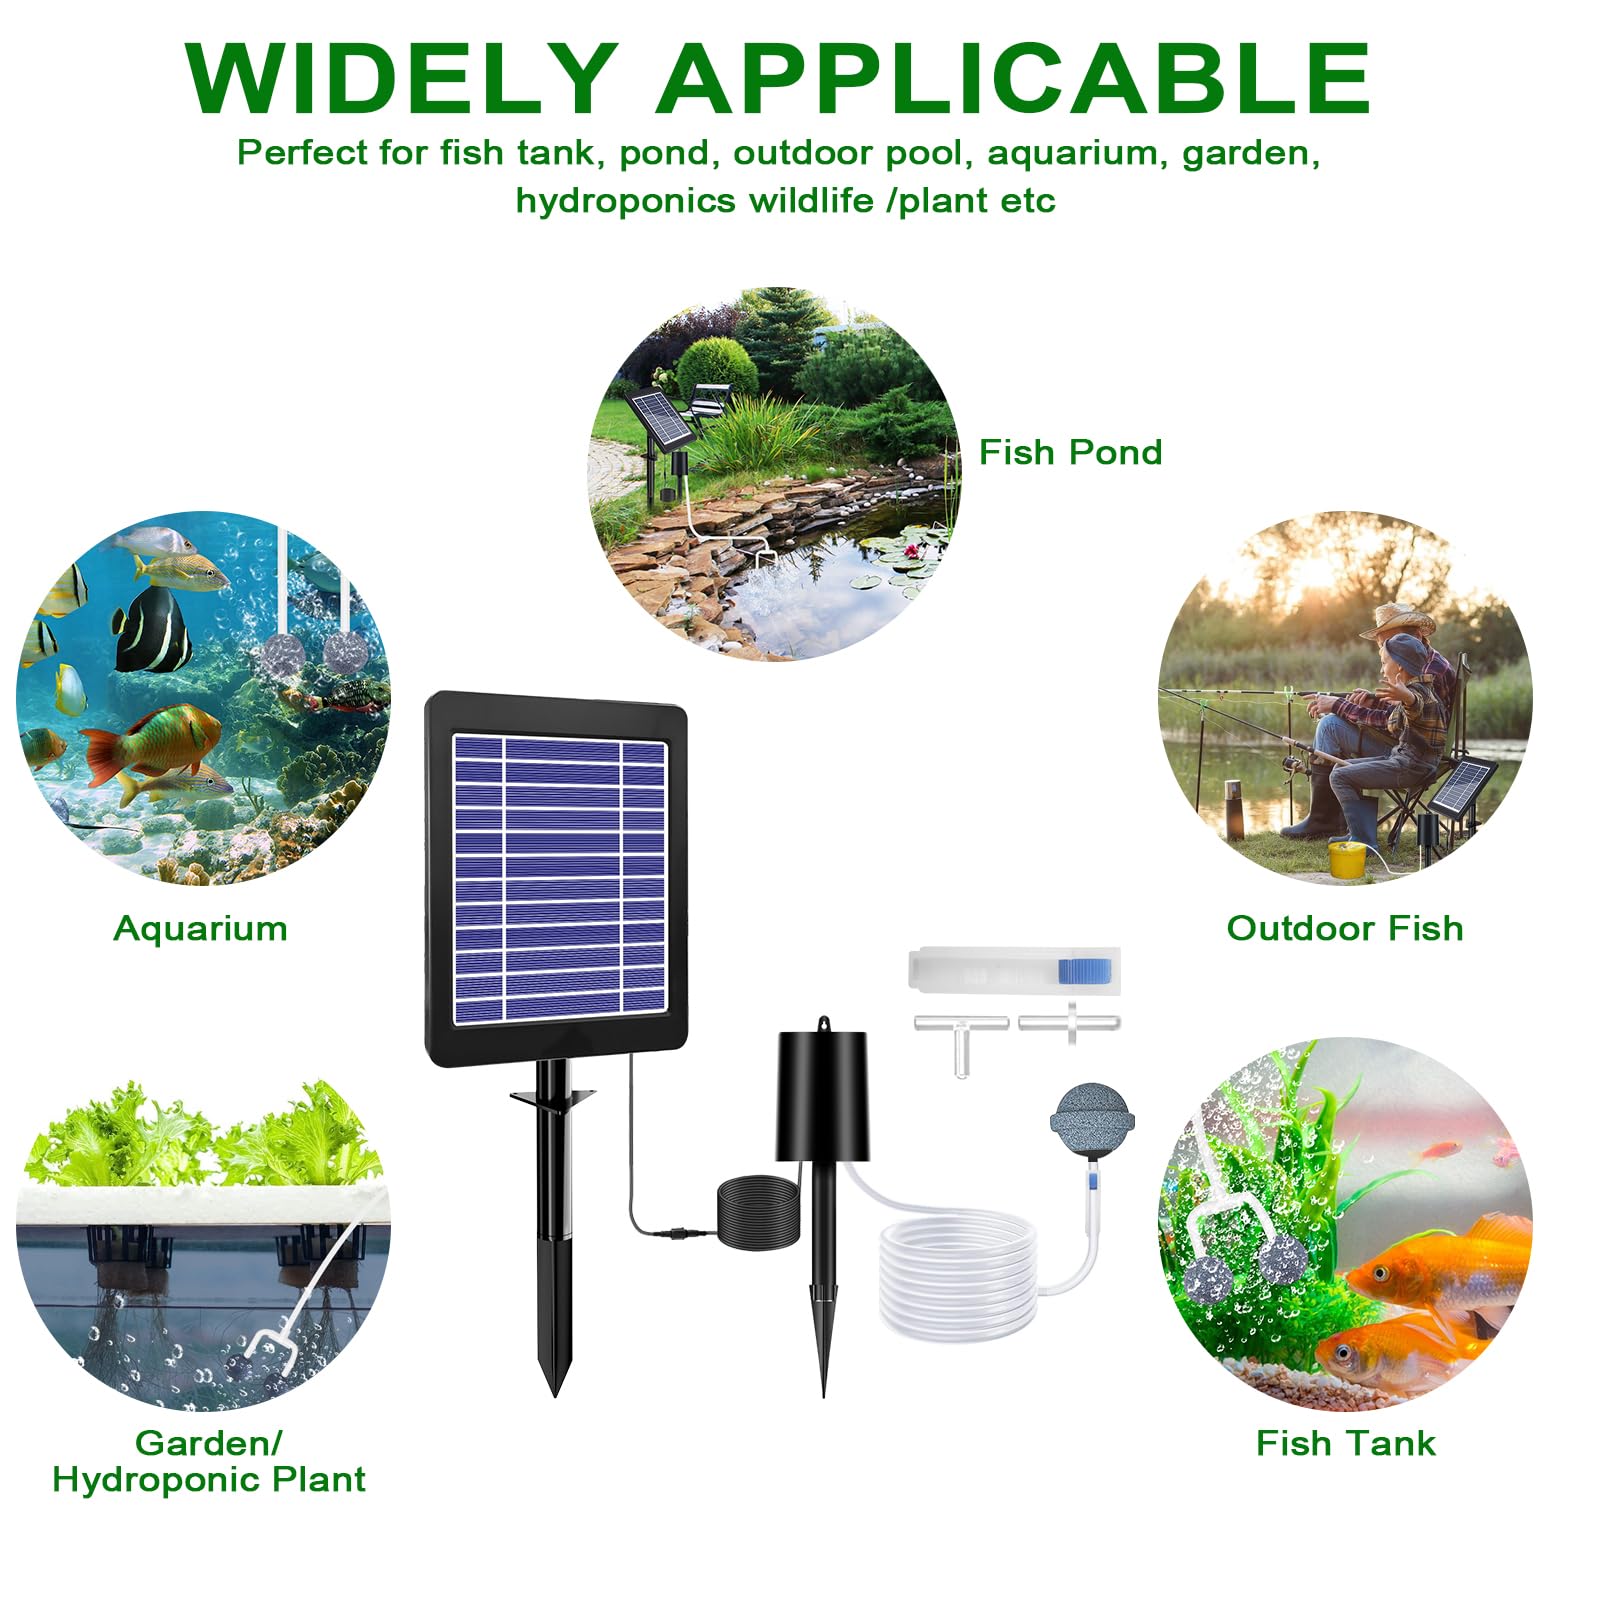 Solar Pond Aerator with Air Pump, 3 Modes(18H/36H/72H) Solar Aerator for Ponds Outdoor, 4W & 2200 mAh Solar Powered Air Pump with Bubble Regulator for Small Fish Pond, Stock Tank, Aquarium Hydroponics